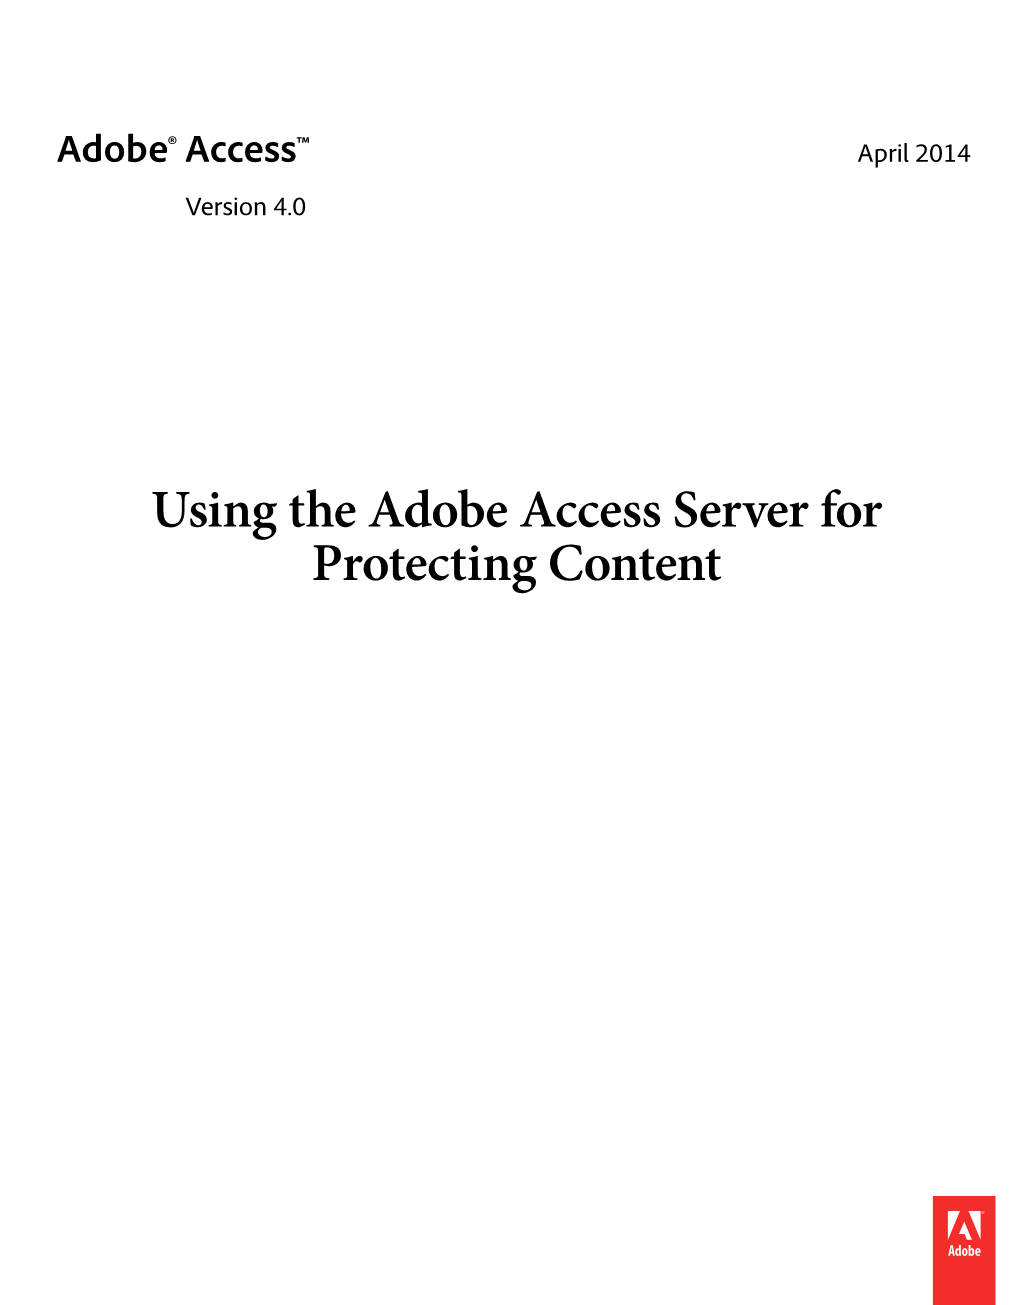 Adobe Access Server for Protecting Content Copyright © 2012-2014 Adobe Systems Incorporated